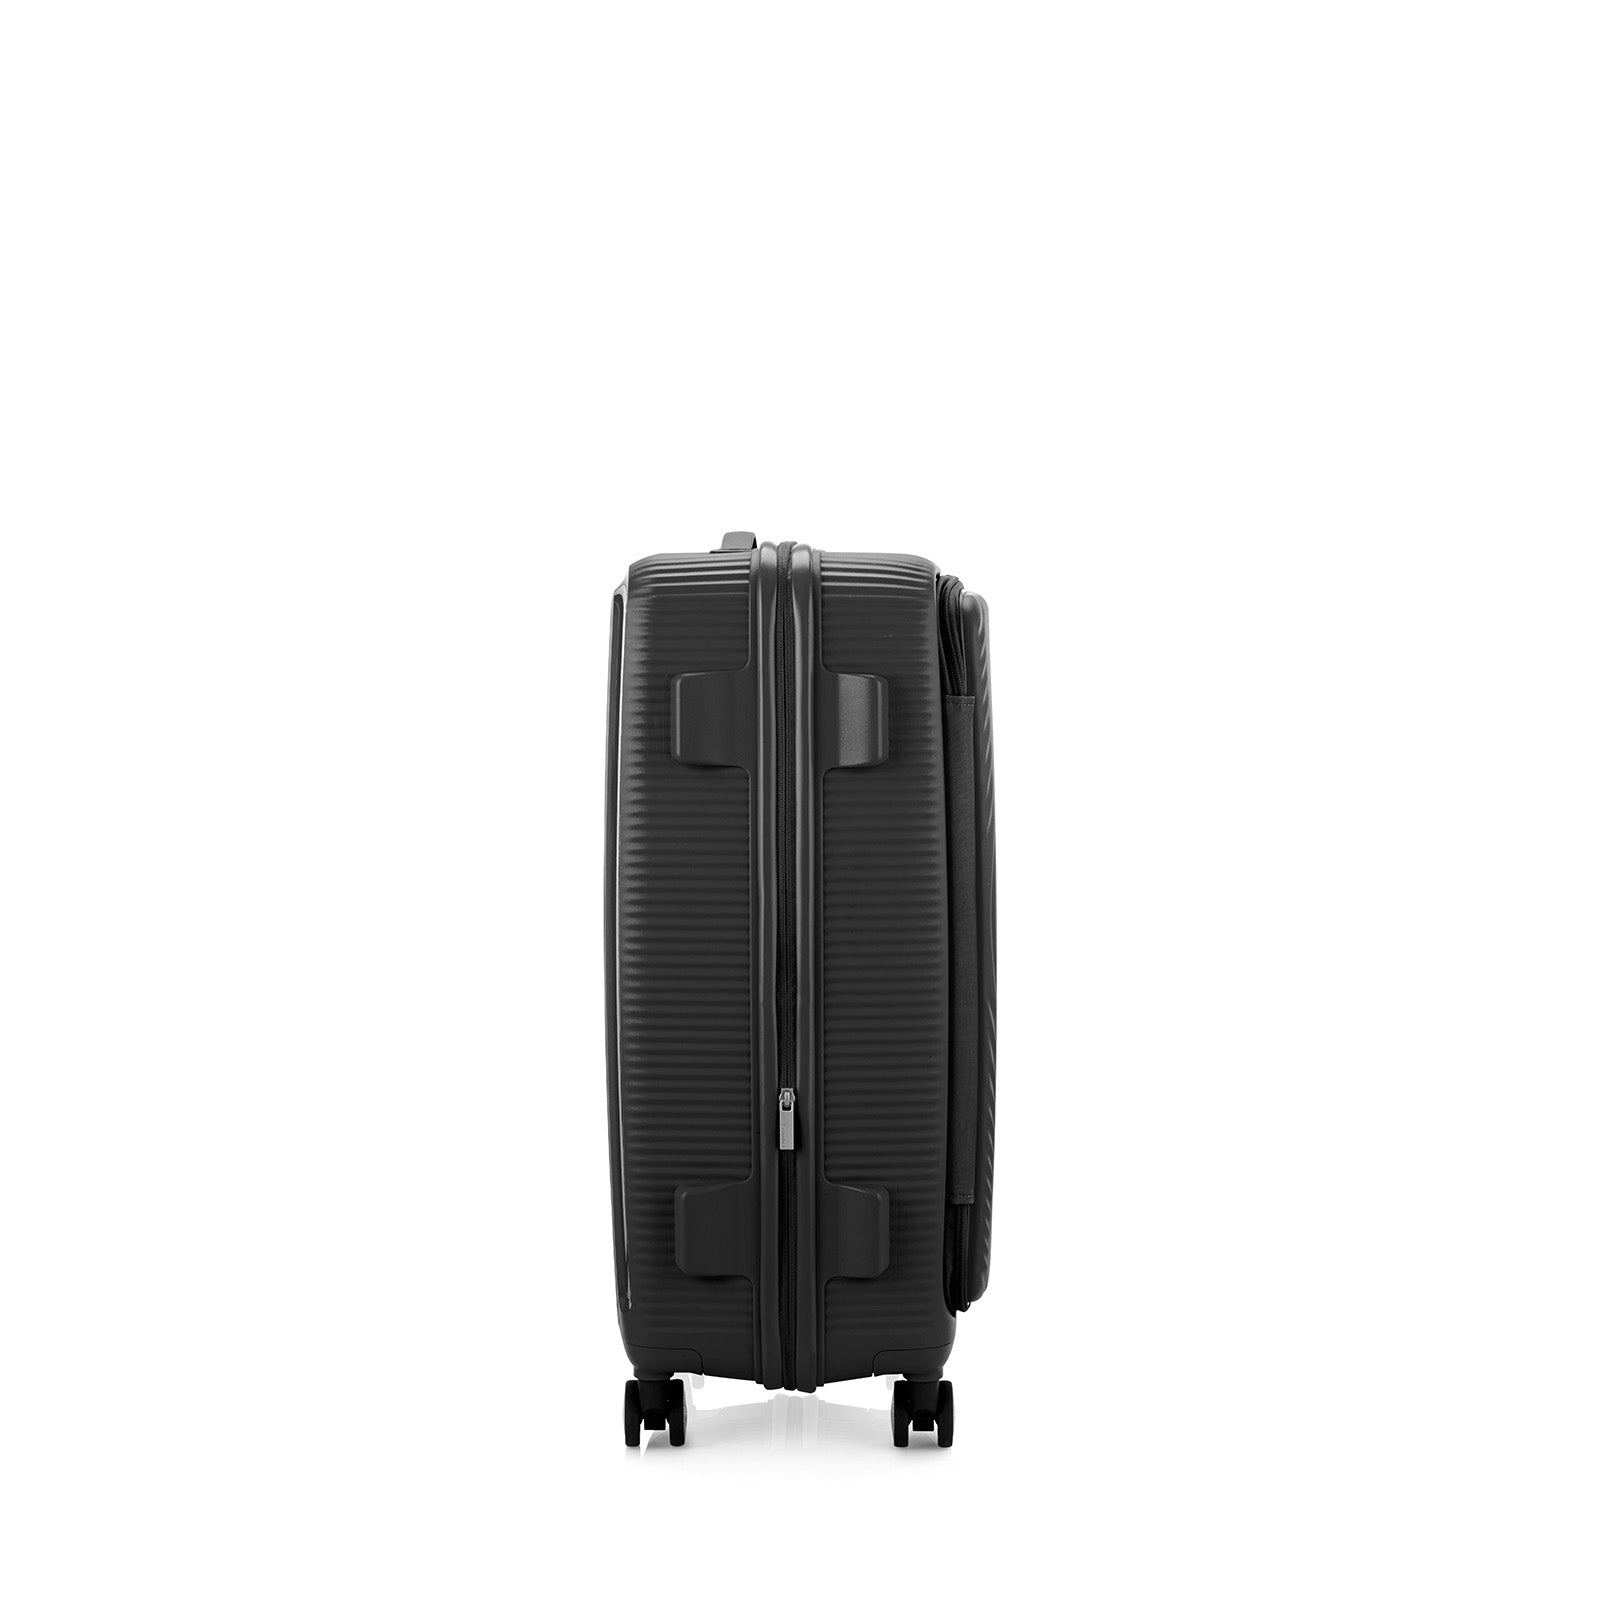 American-Tourister-Curio-Book-Opening-75cm-Suitcase-Black-Handle-Side